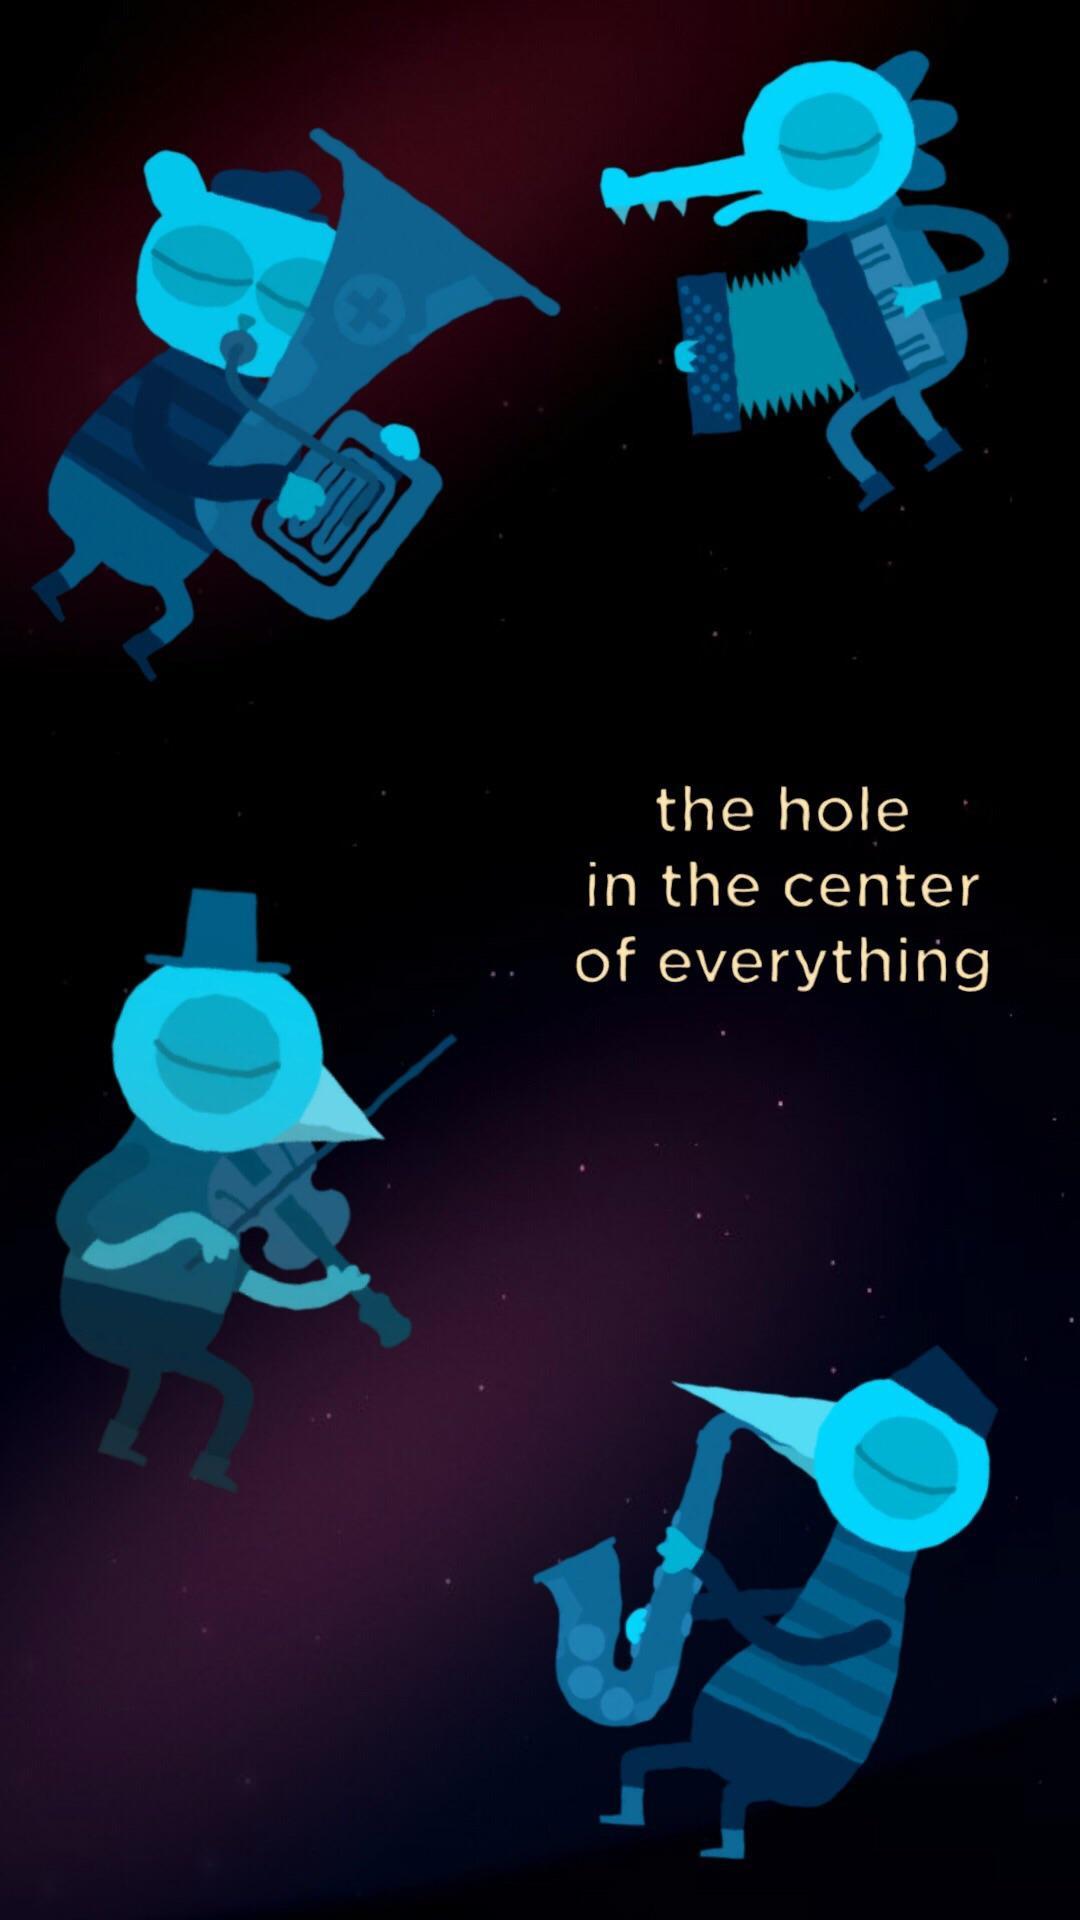 Awesome iPhone Wallpaper Msg Me For More, Nightinthewoods